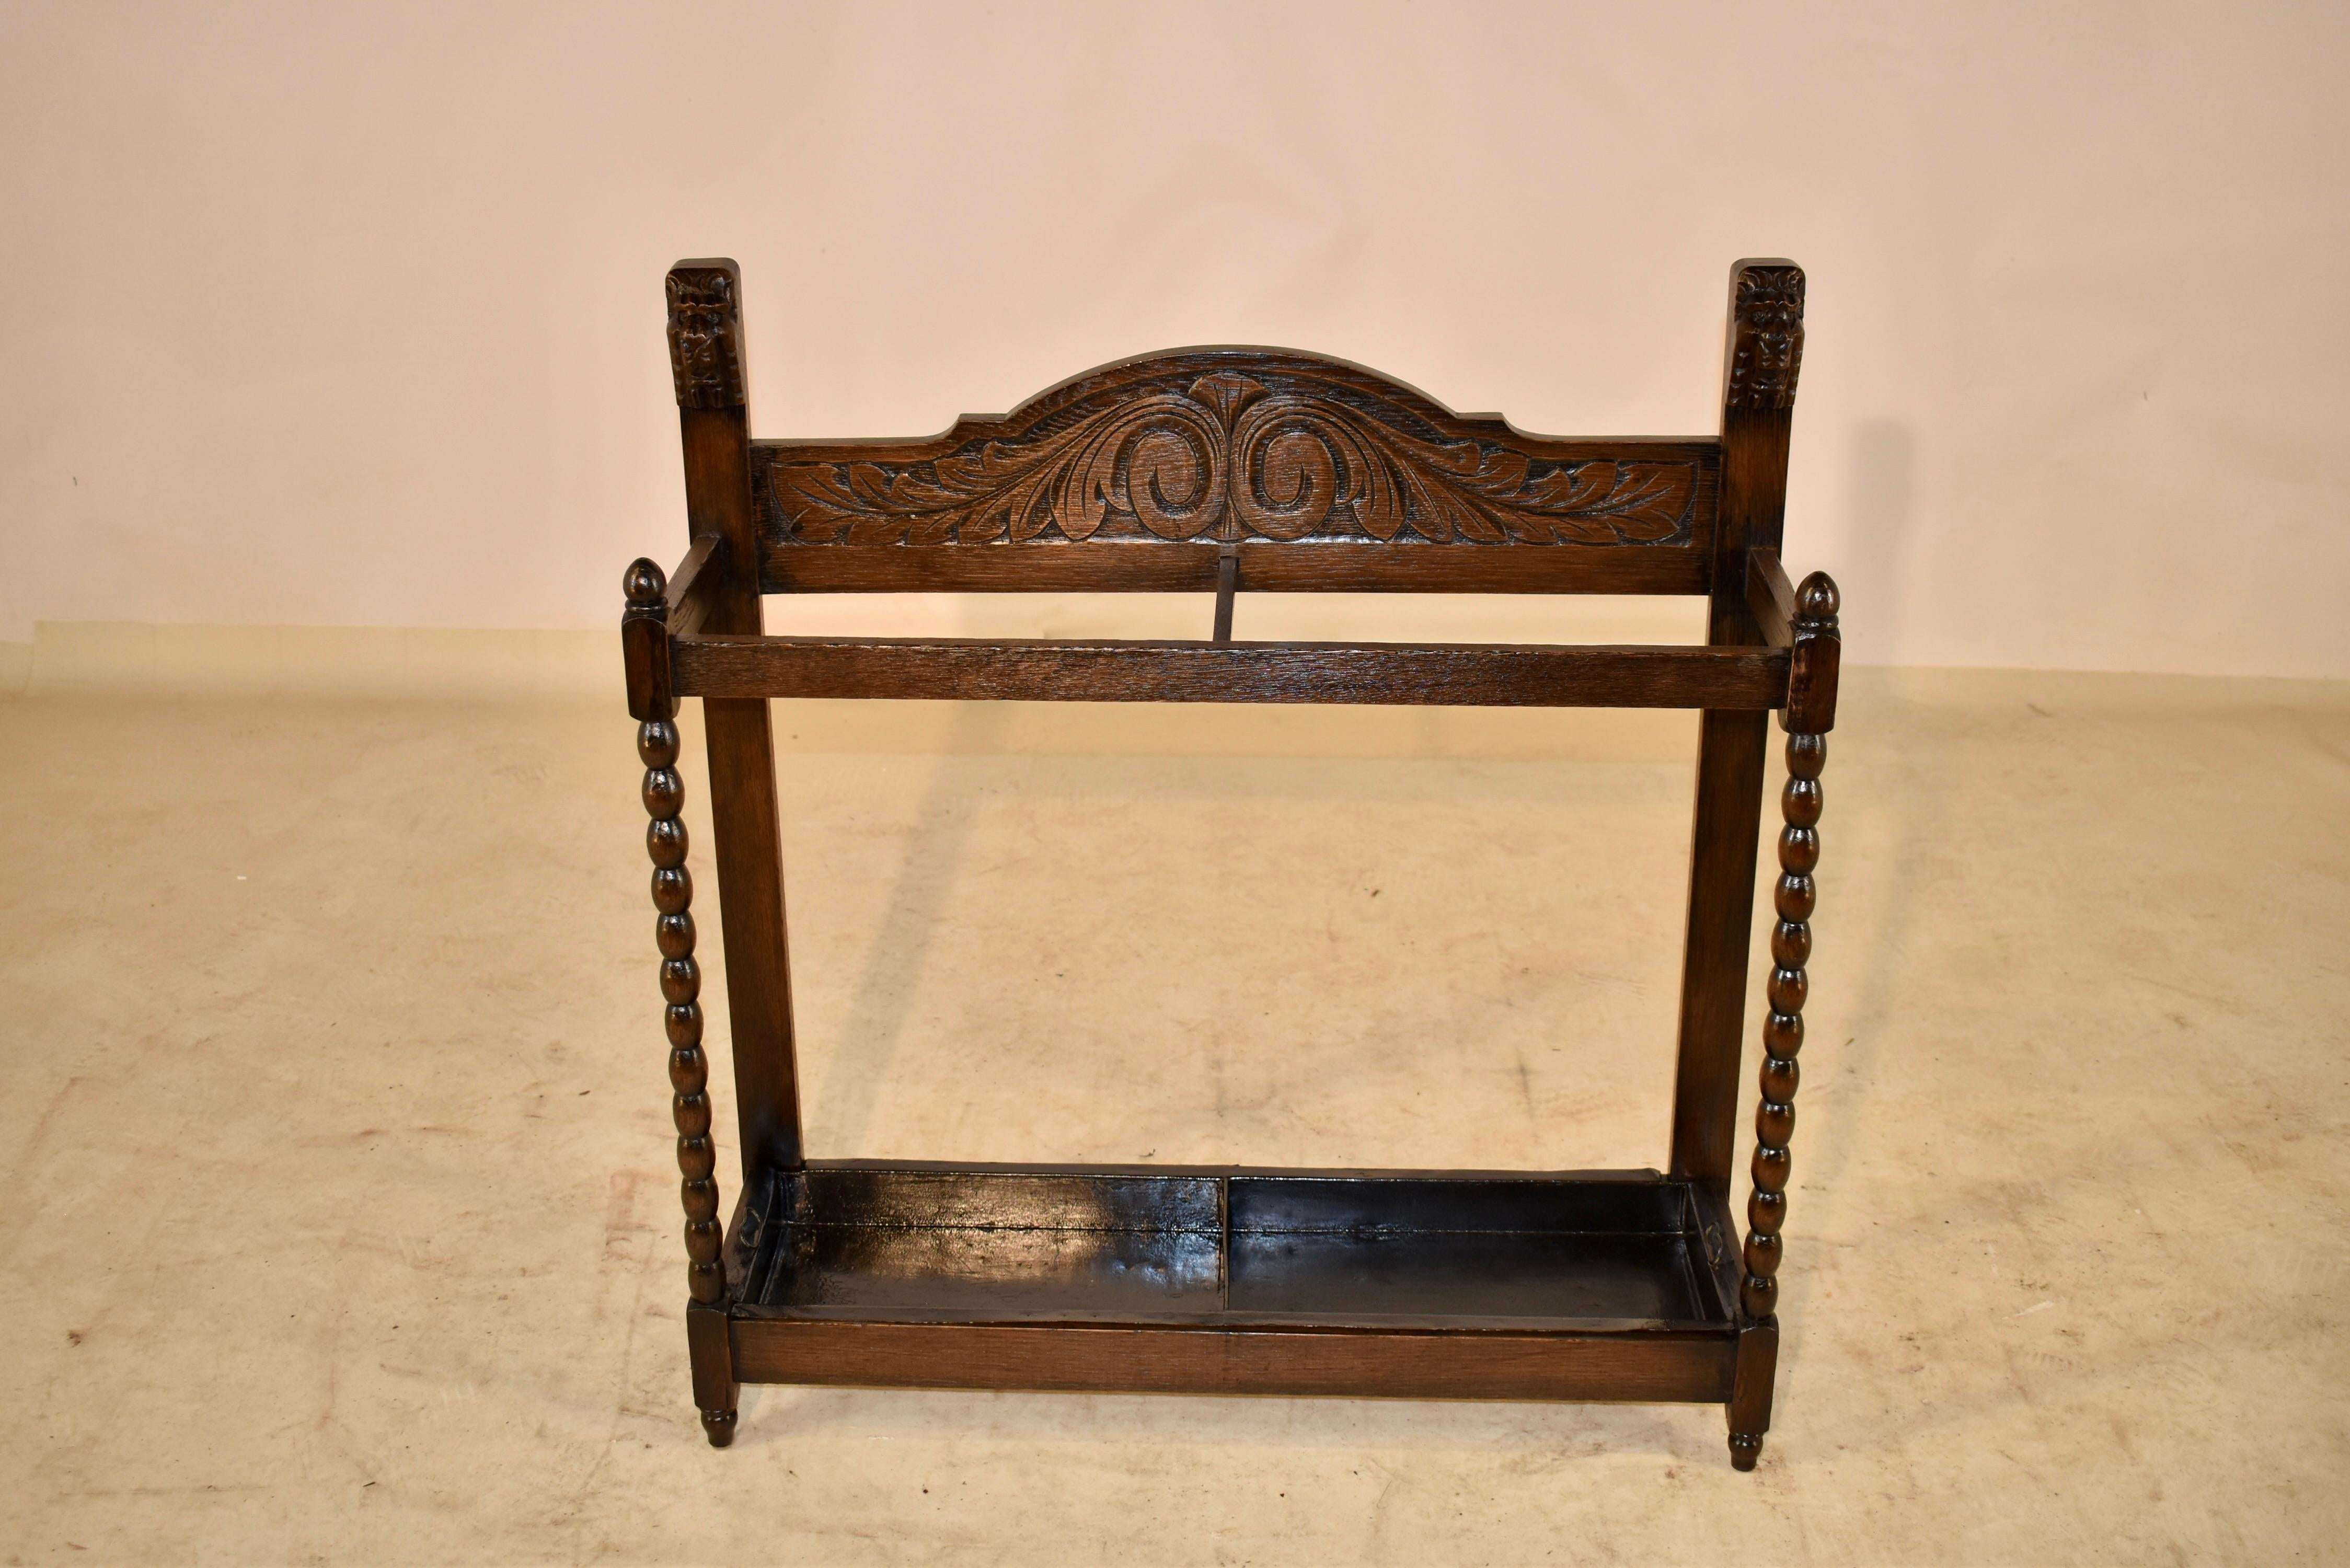 Late 19th century oak umbrella stand from England with hand carved decoration on the back, flanked by hand carved lion's heads. The front legs are hand turned in a bobbin design and the back legs are simple to fit easily against a wall. The original